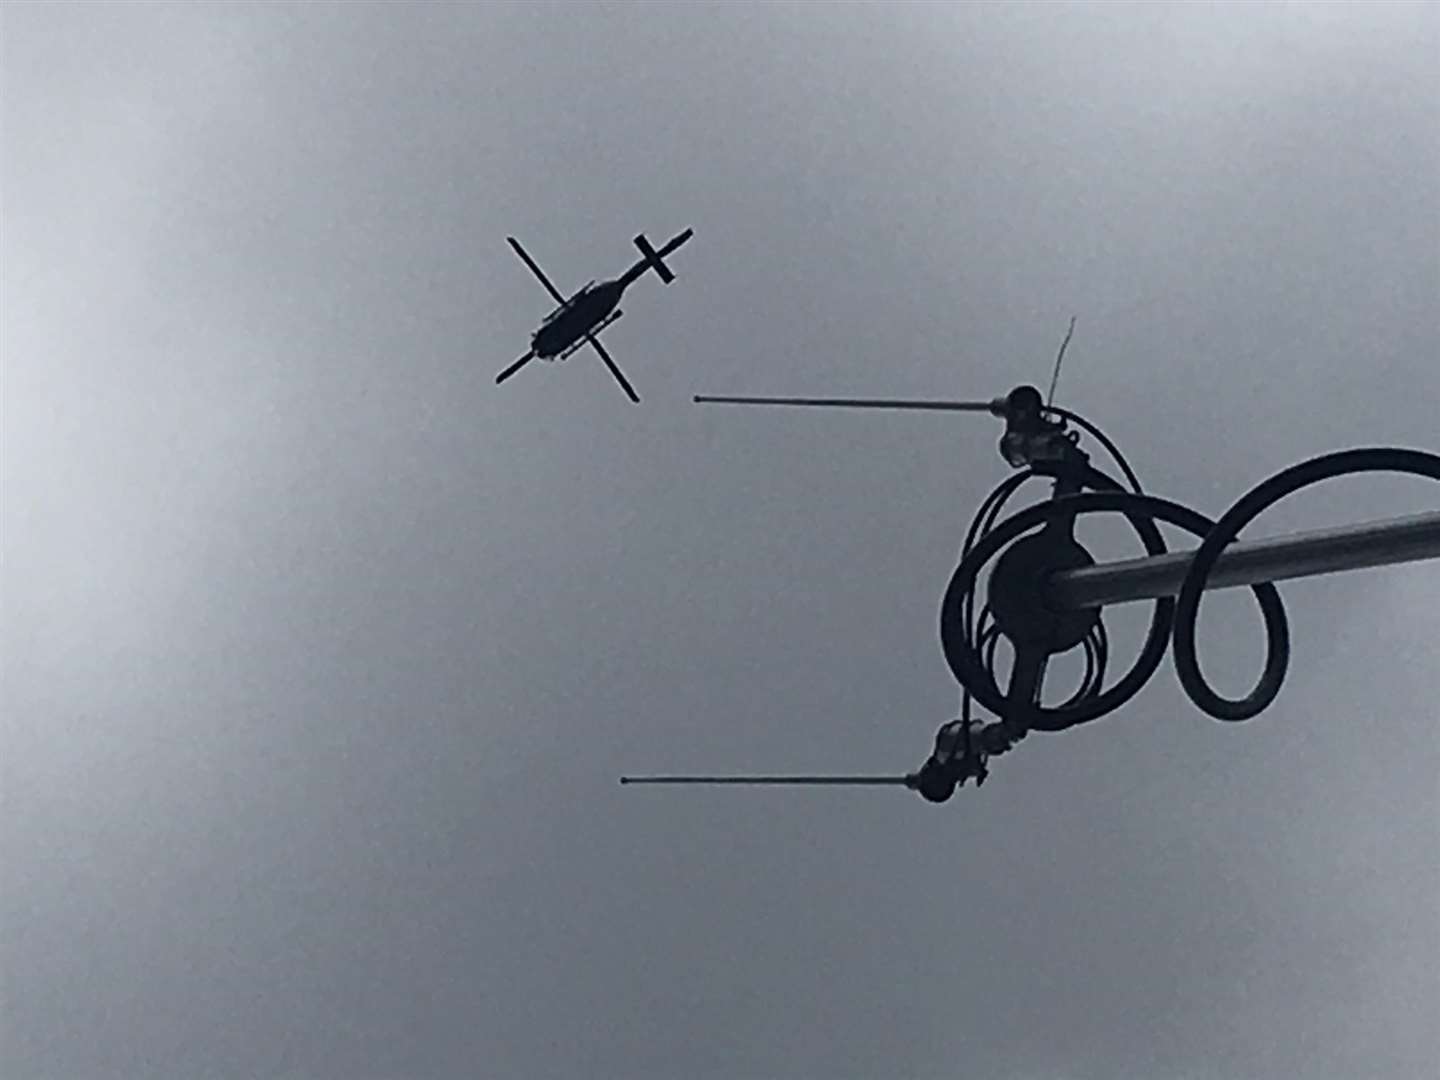 A police helicopter has been launched in Maidstone. (2332170)